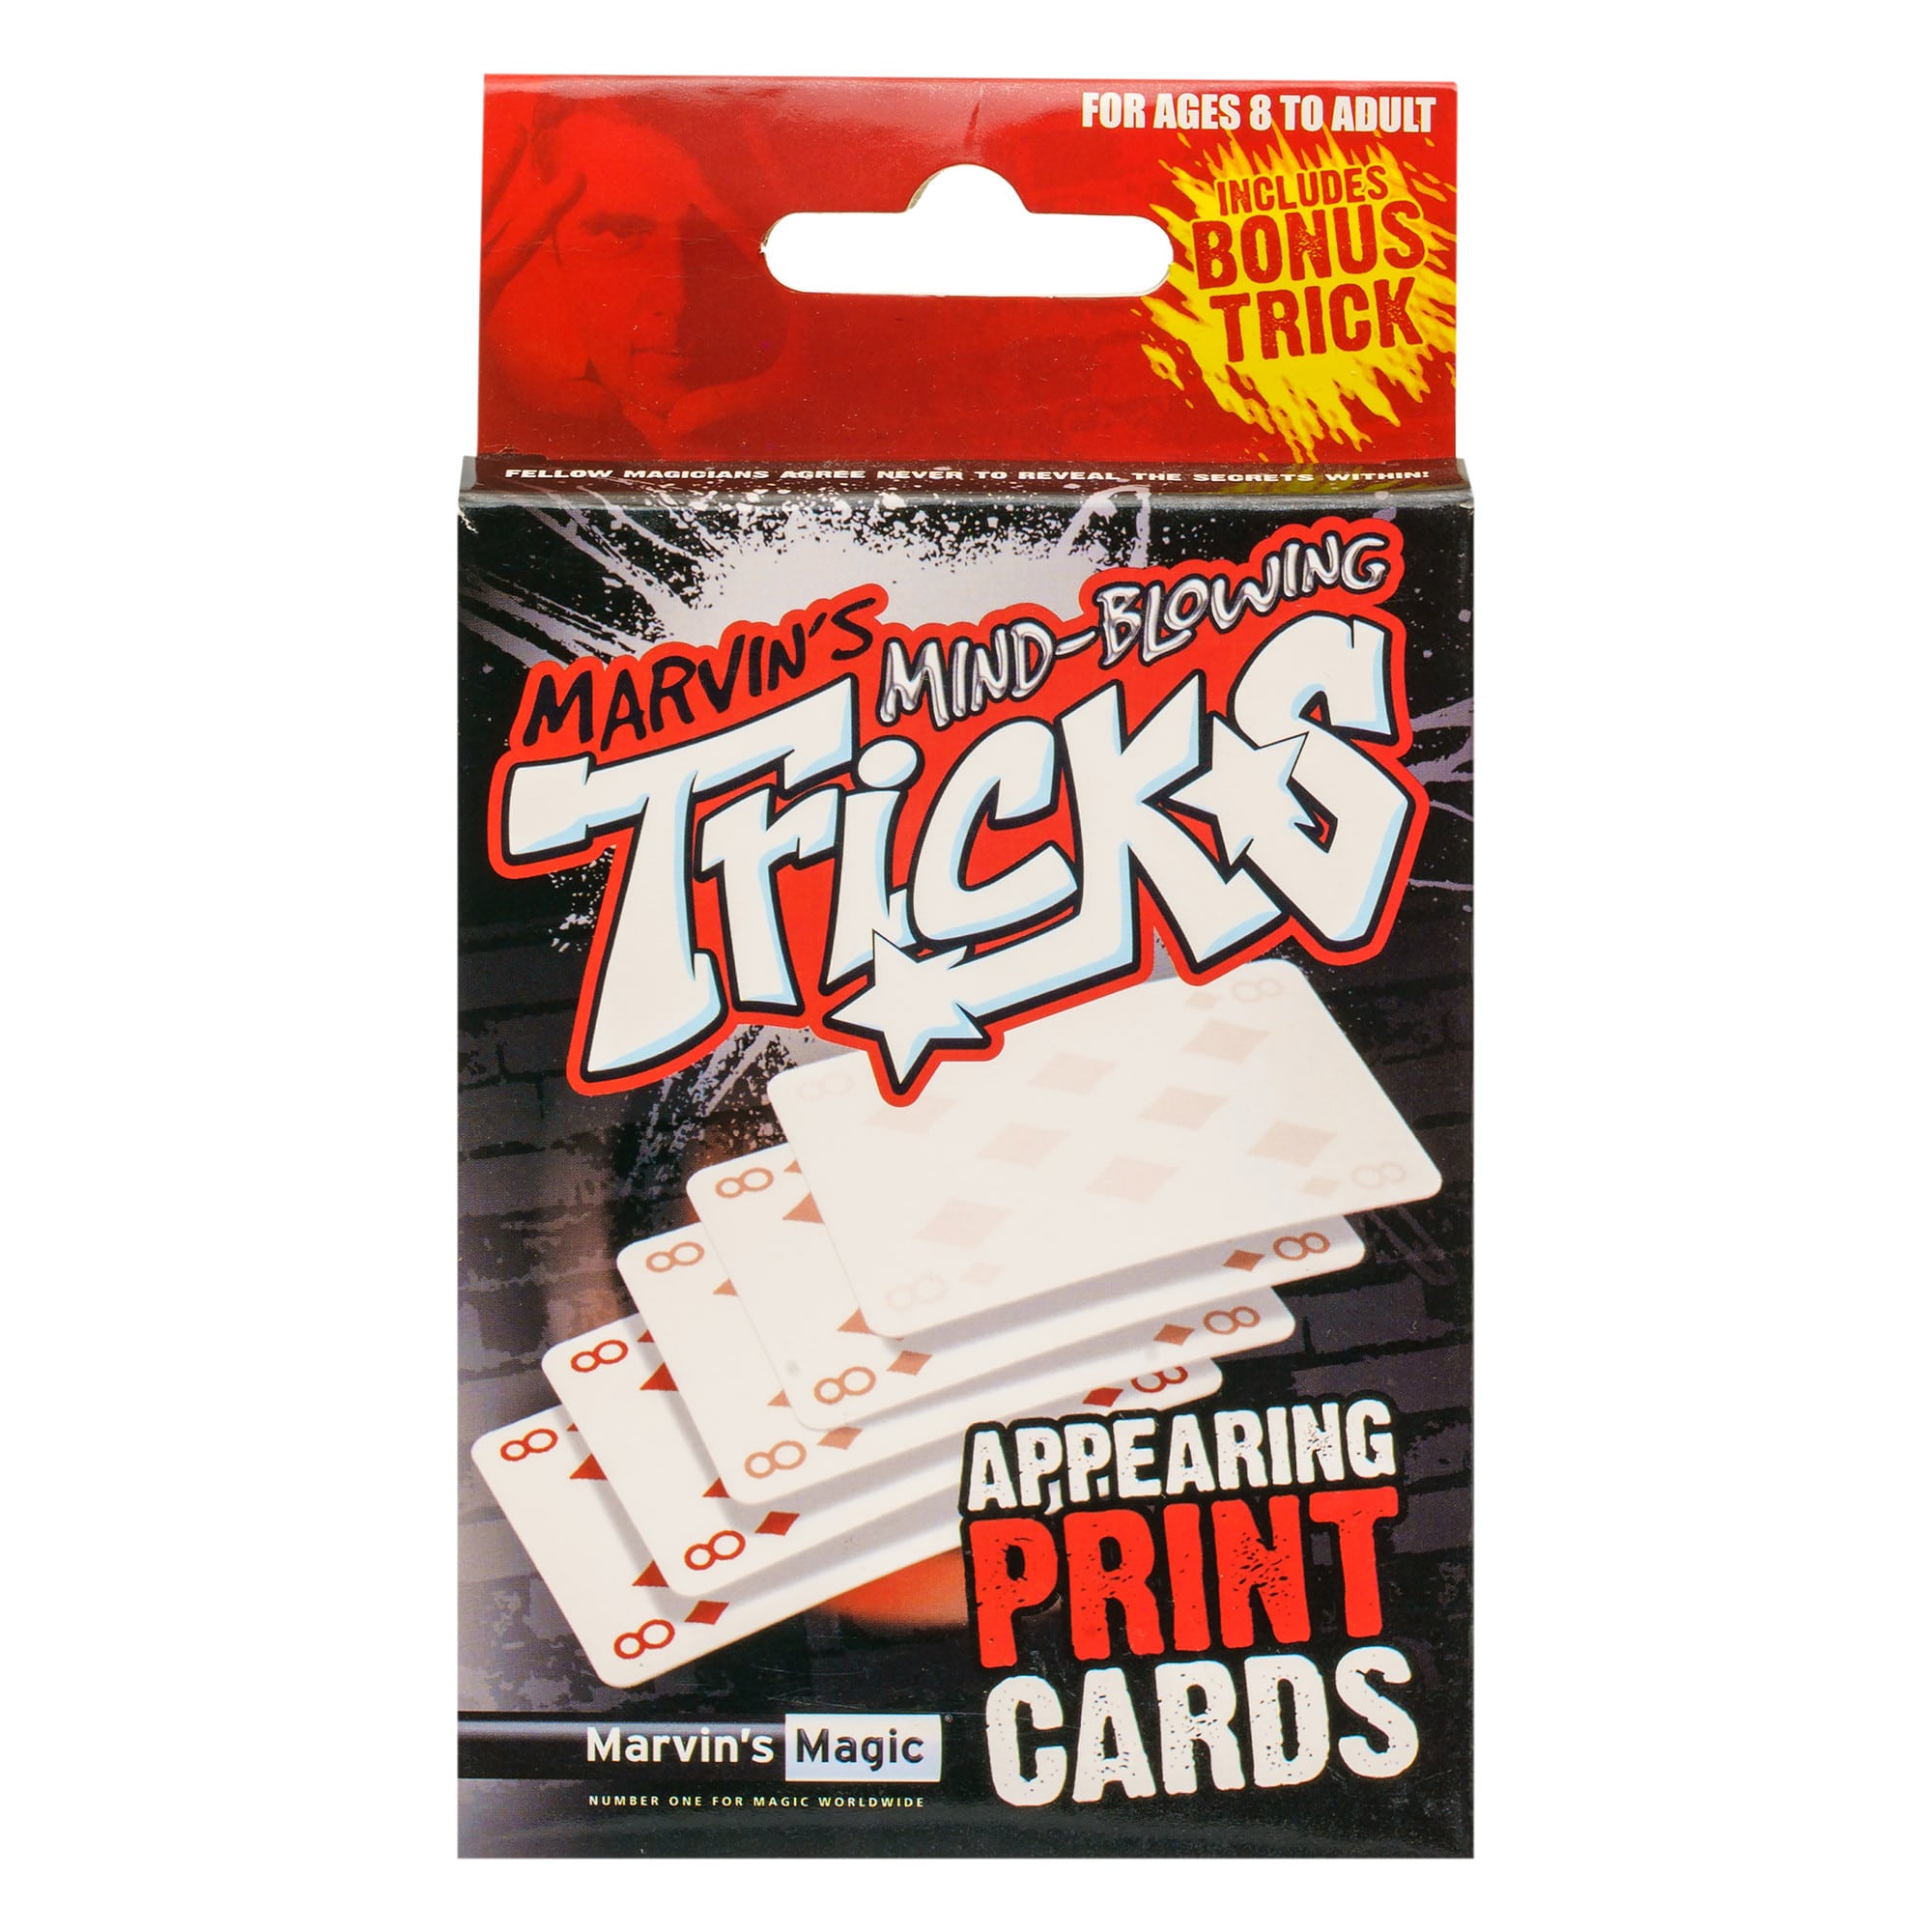 Marvin's Magic - Mind-Blowing Tricks Card Tricks - Appearing Print Cards